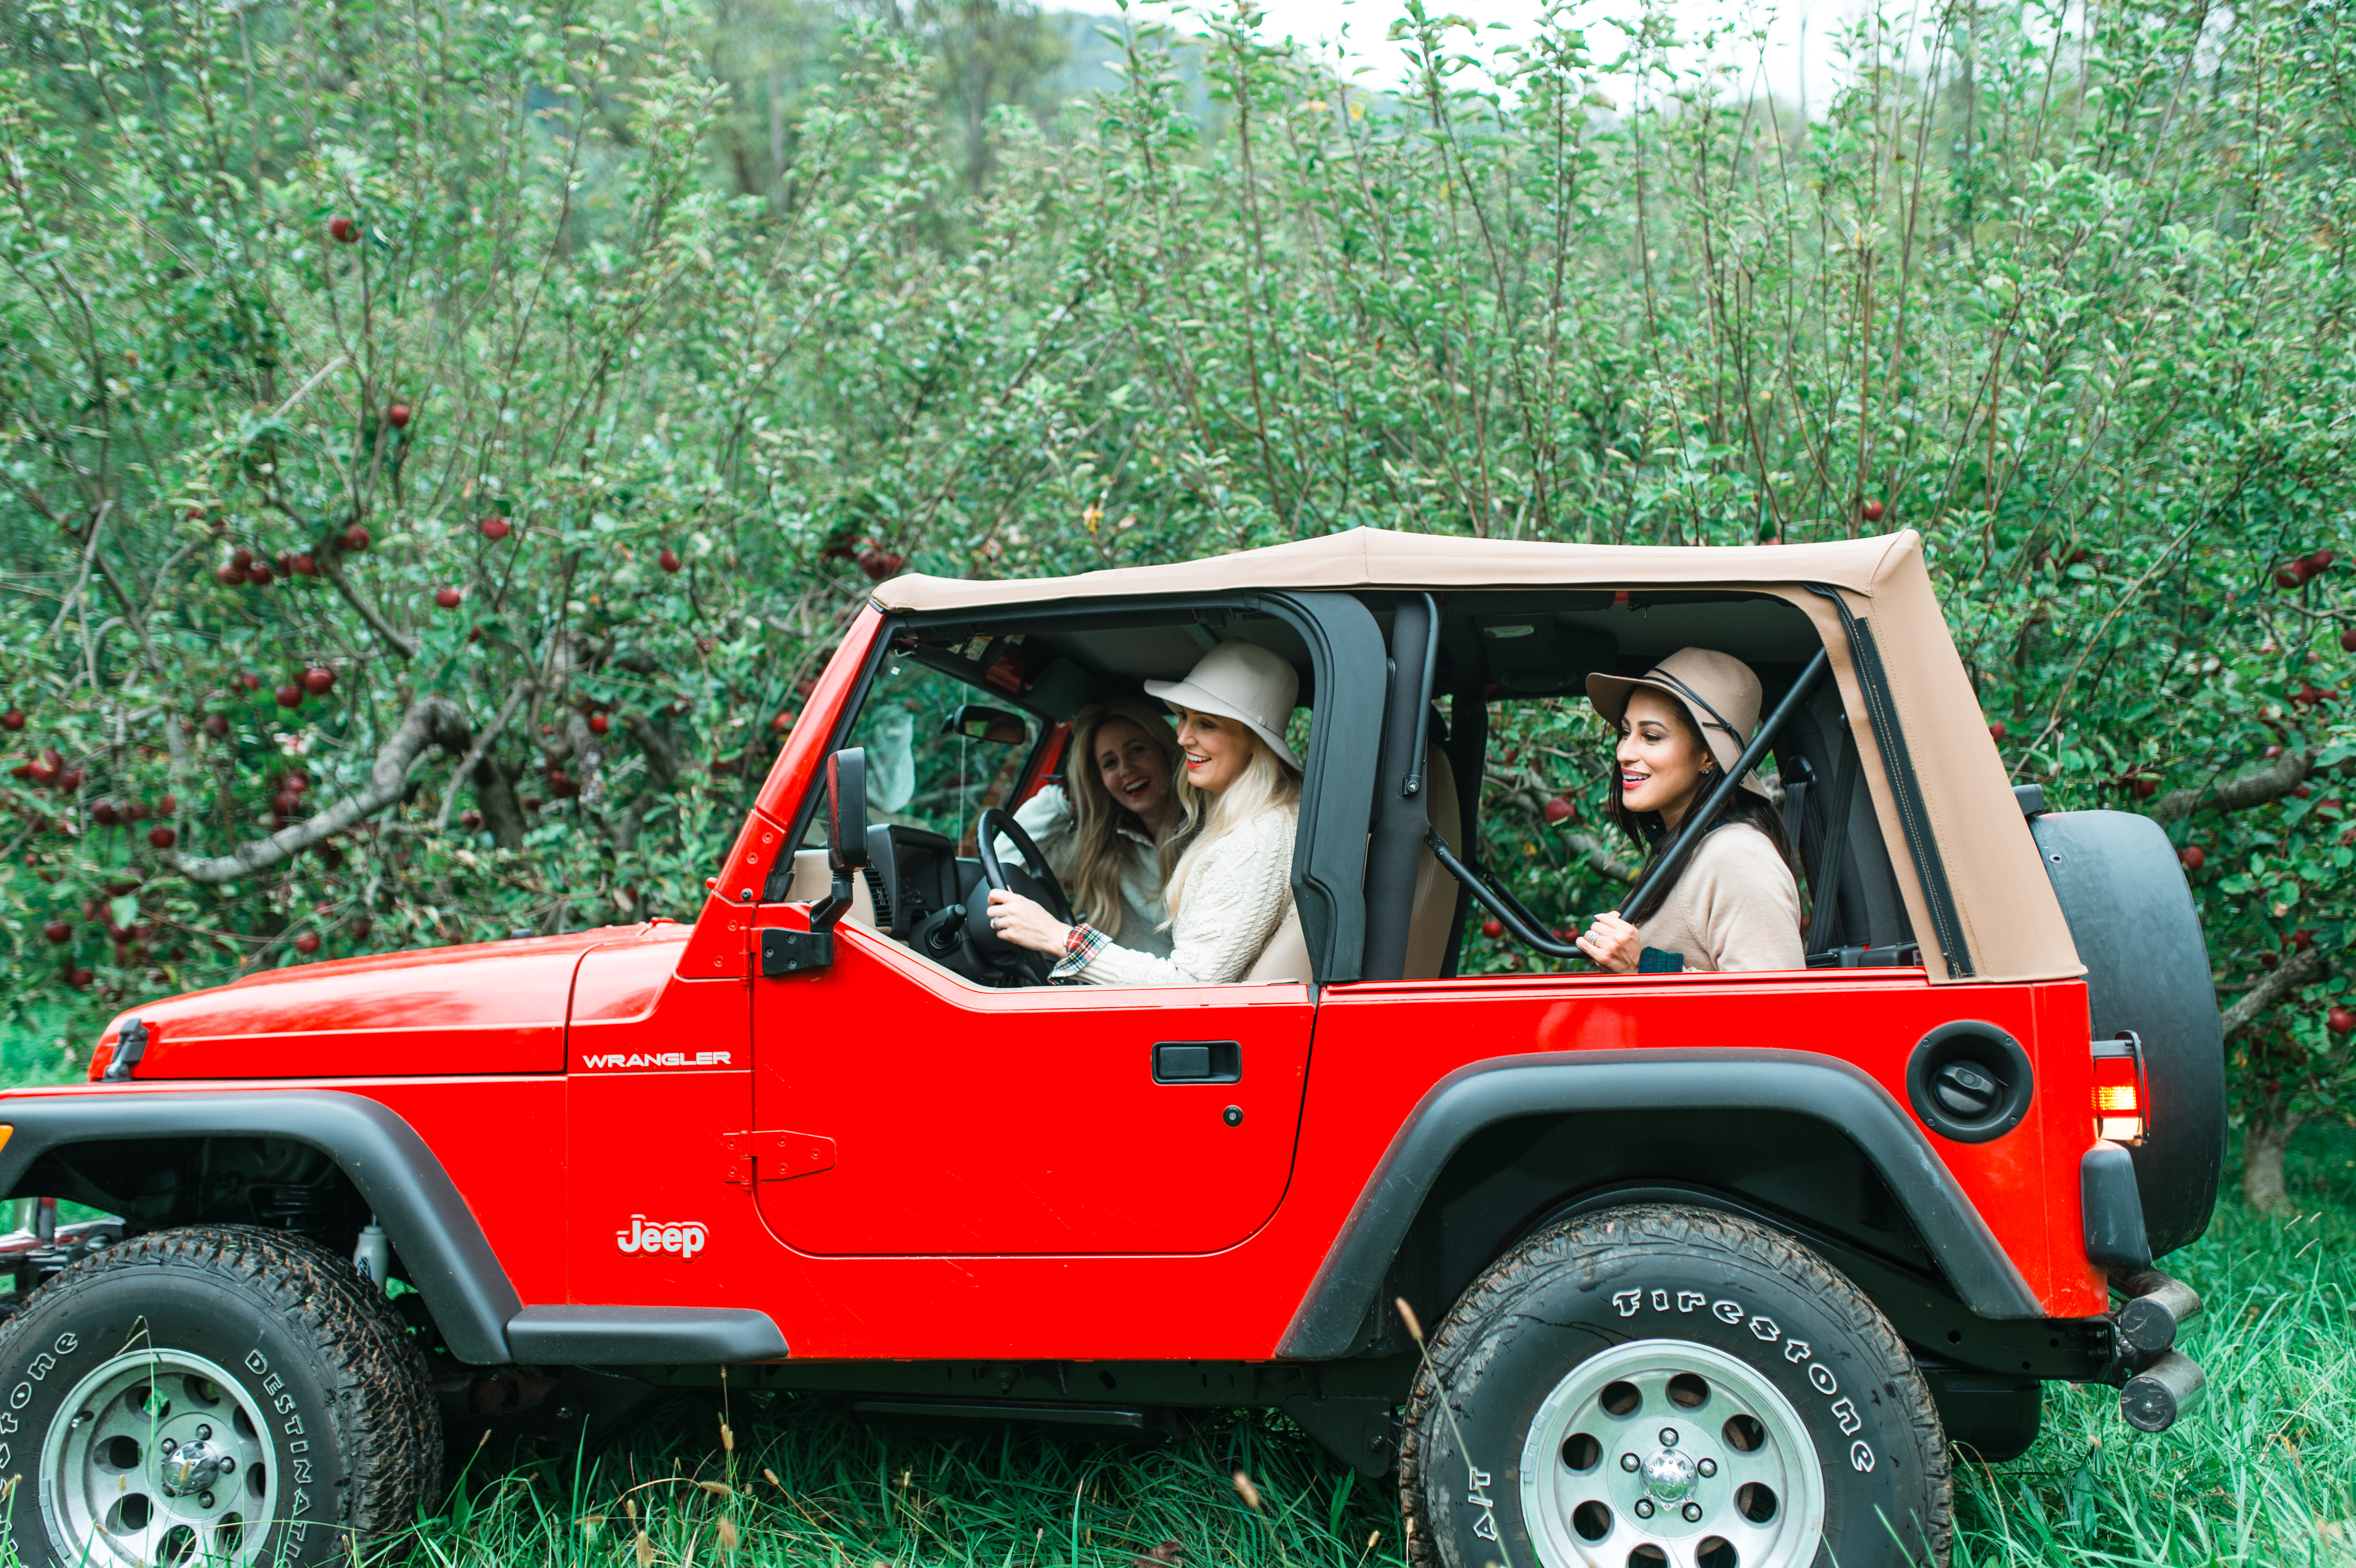 2002-red-jeep-wrangler-off-road-photoshoot - Peachfully Chic